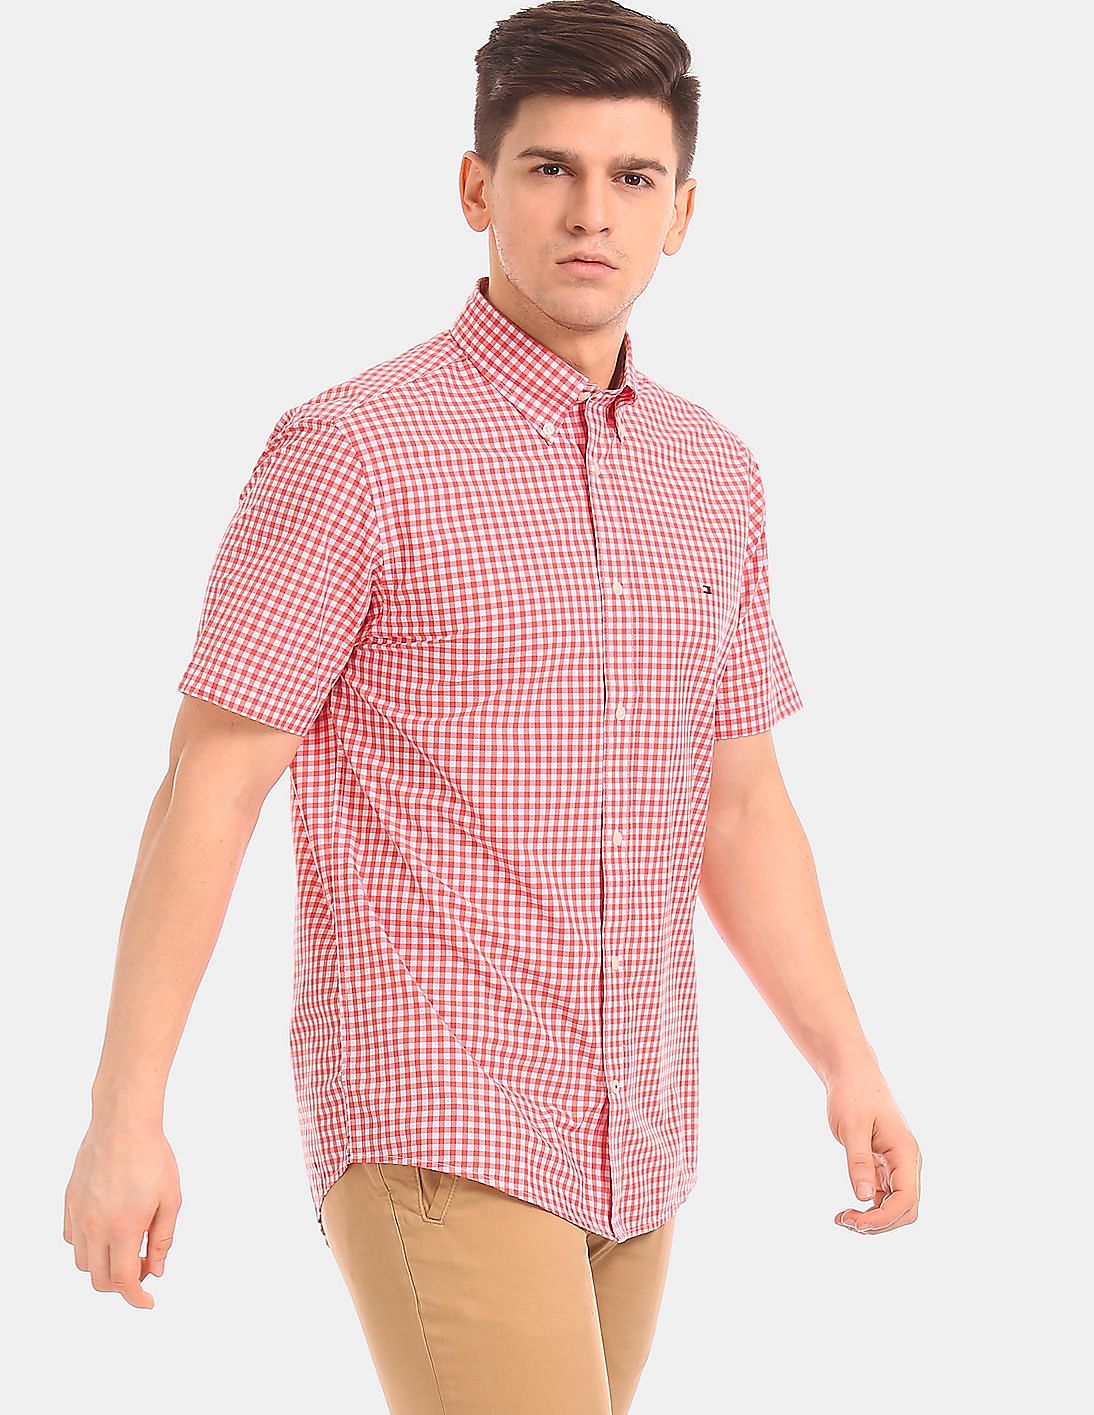 mens red short sleeve button down